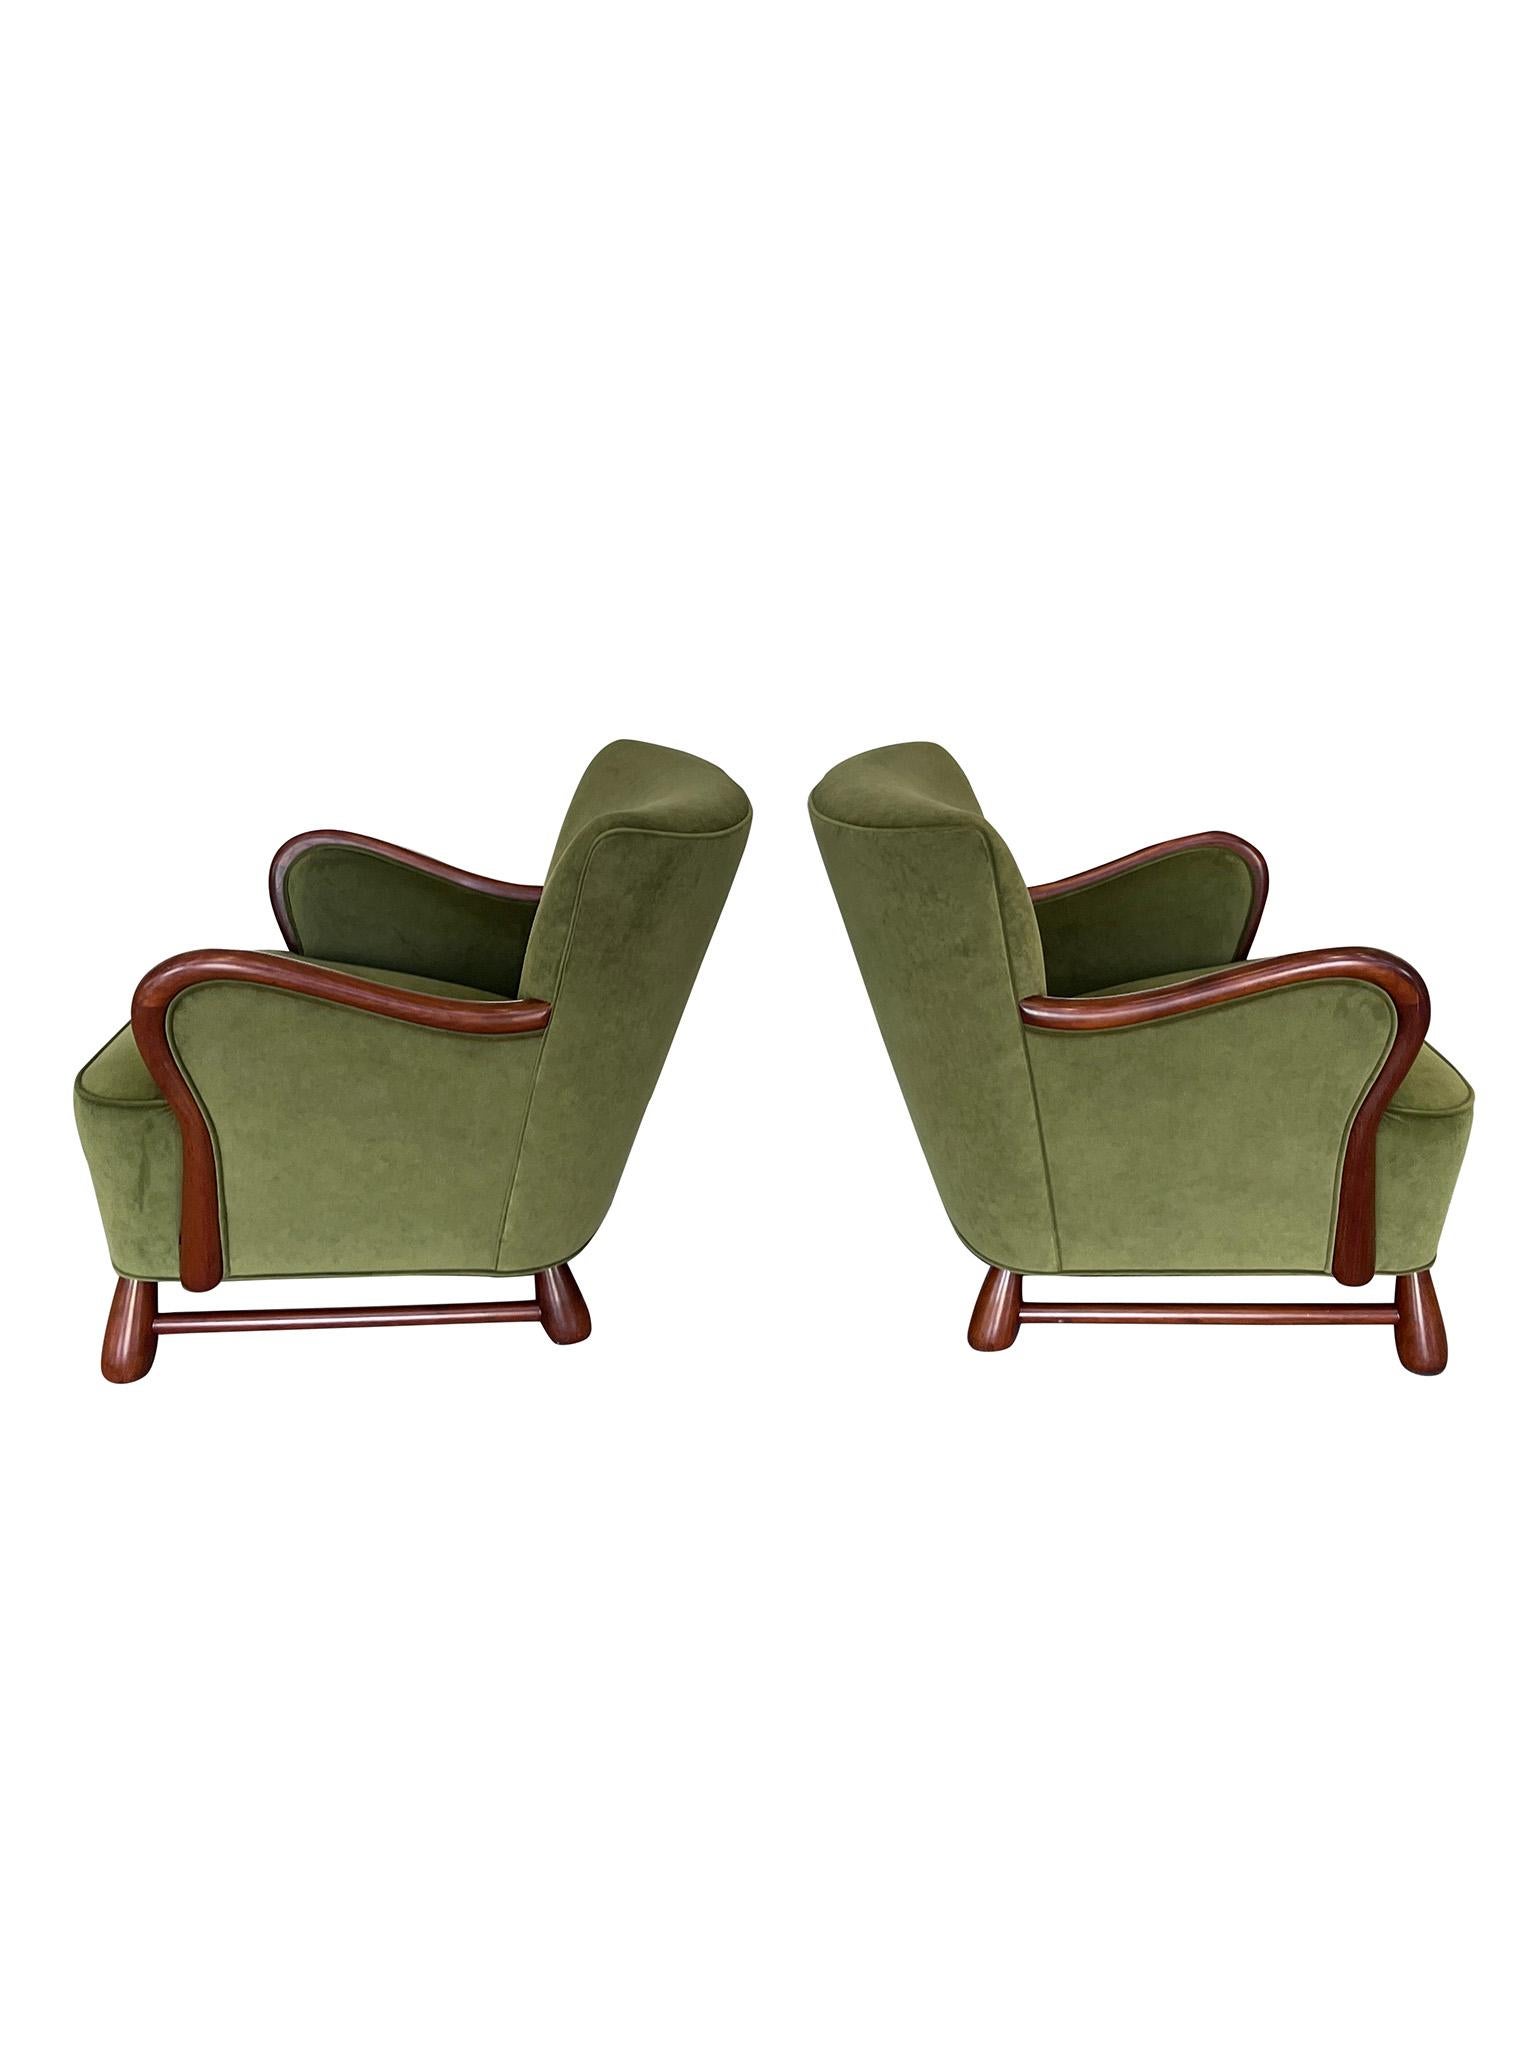 Pair of Danish Art Deco Mahogany Armchairs Attributed to Otto Færge  In Good Condition For Sale In New York, NY